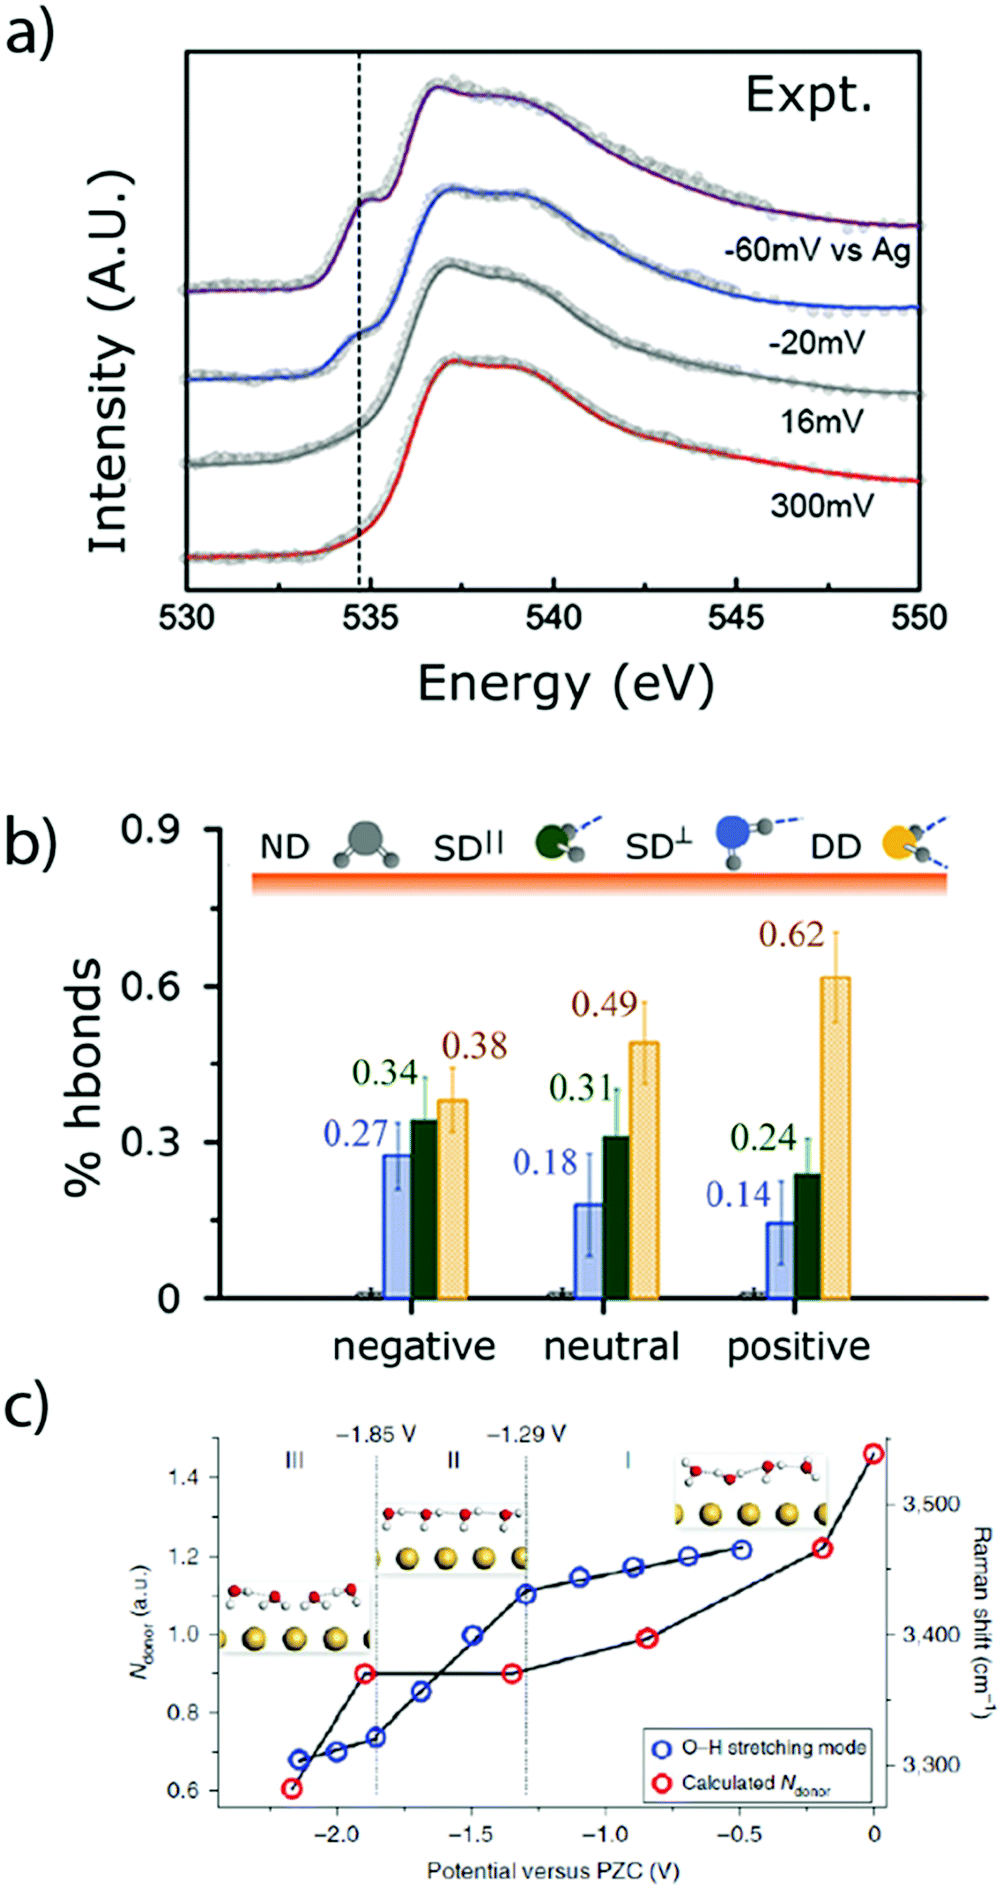 Intrinsic kinetic equation for oxygen reduction reaction in acidic media:  the double Tafel slope and fuel cell applications - Faraday Discussions  (RSC Publishing) DOI:10.1039/B802218F